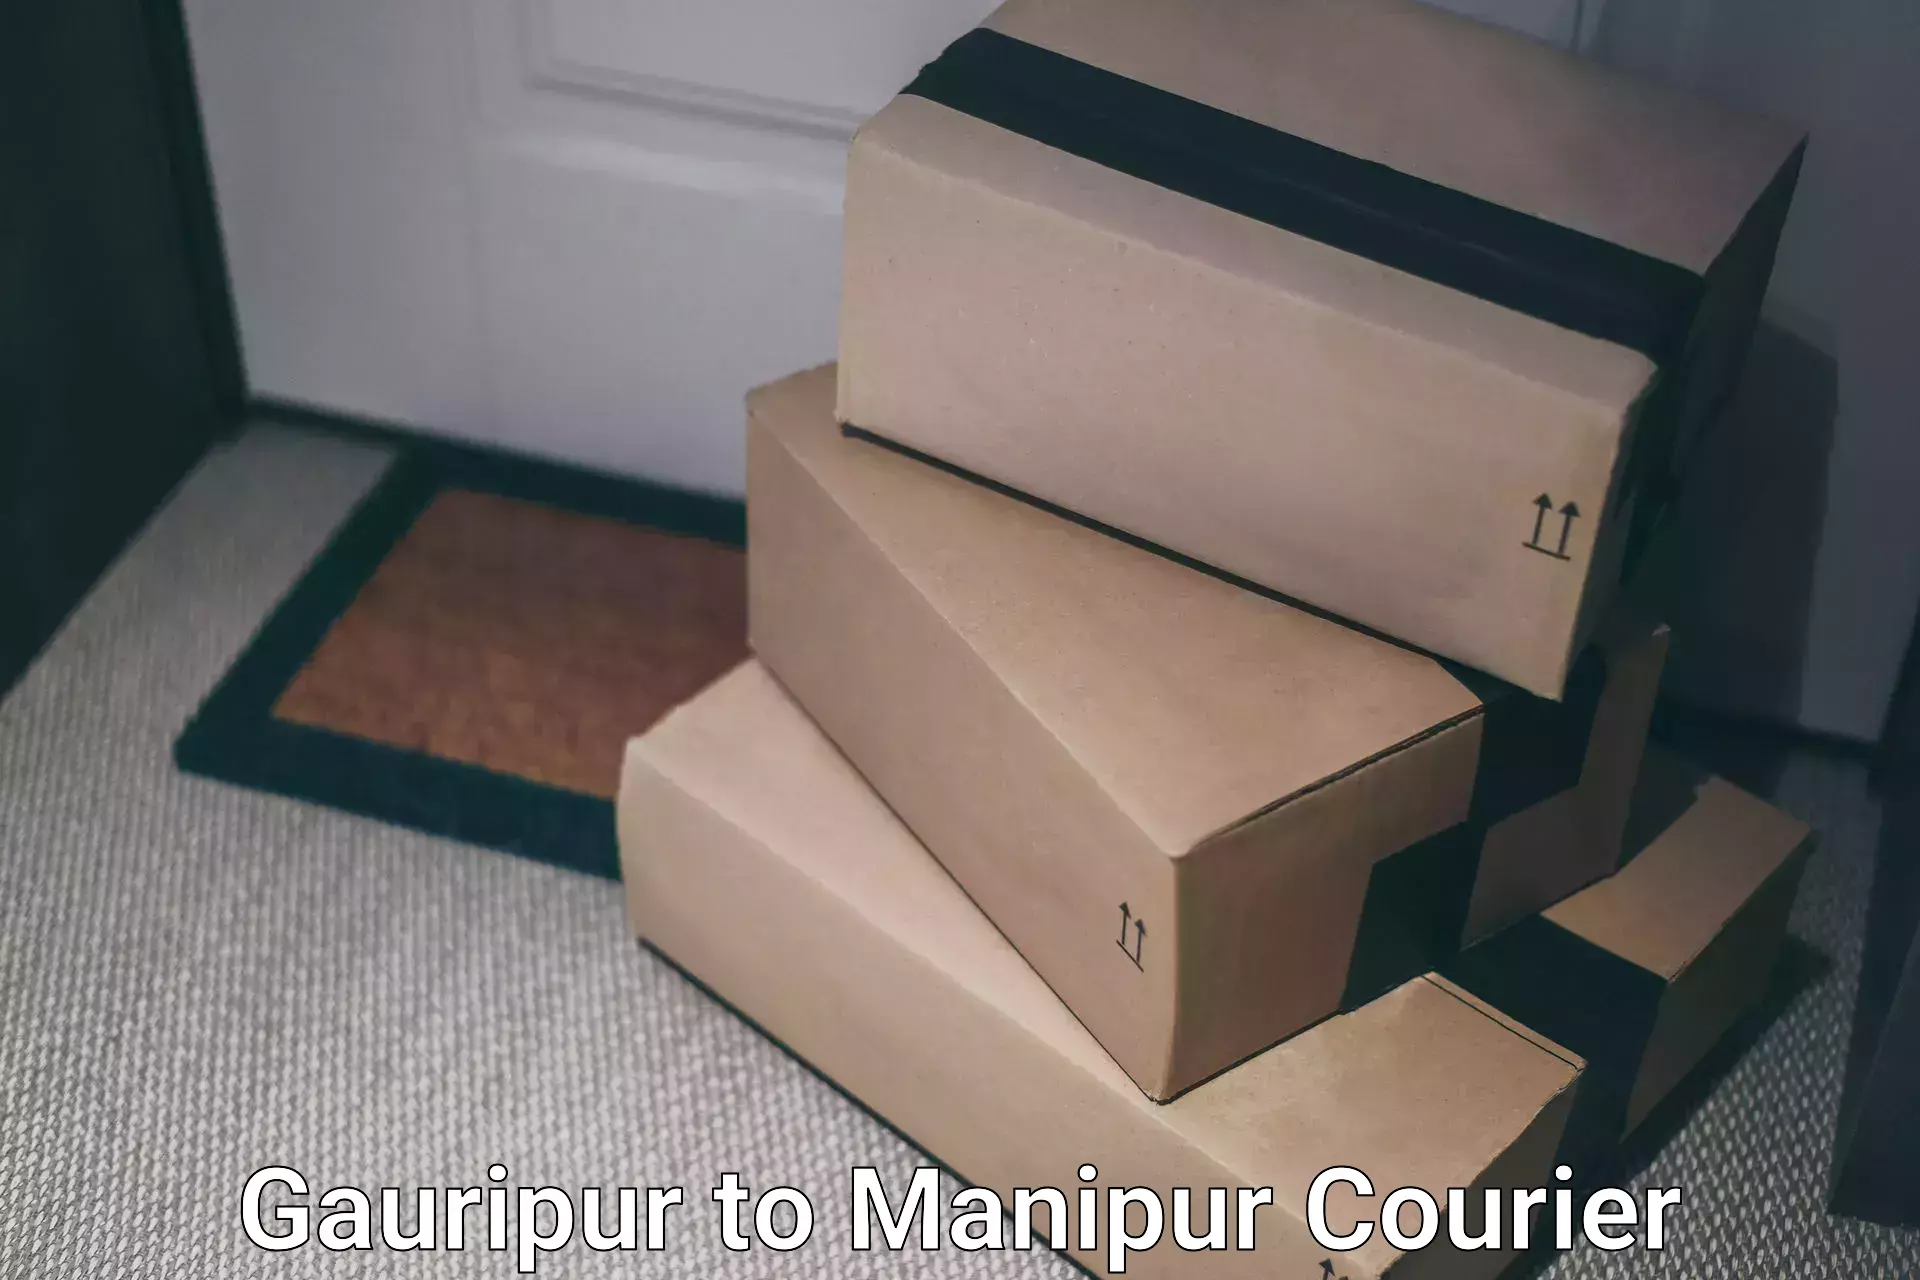 Secure shipping methods Gauripur to Imphal